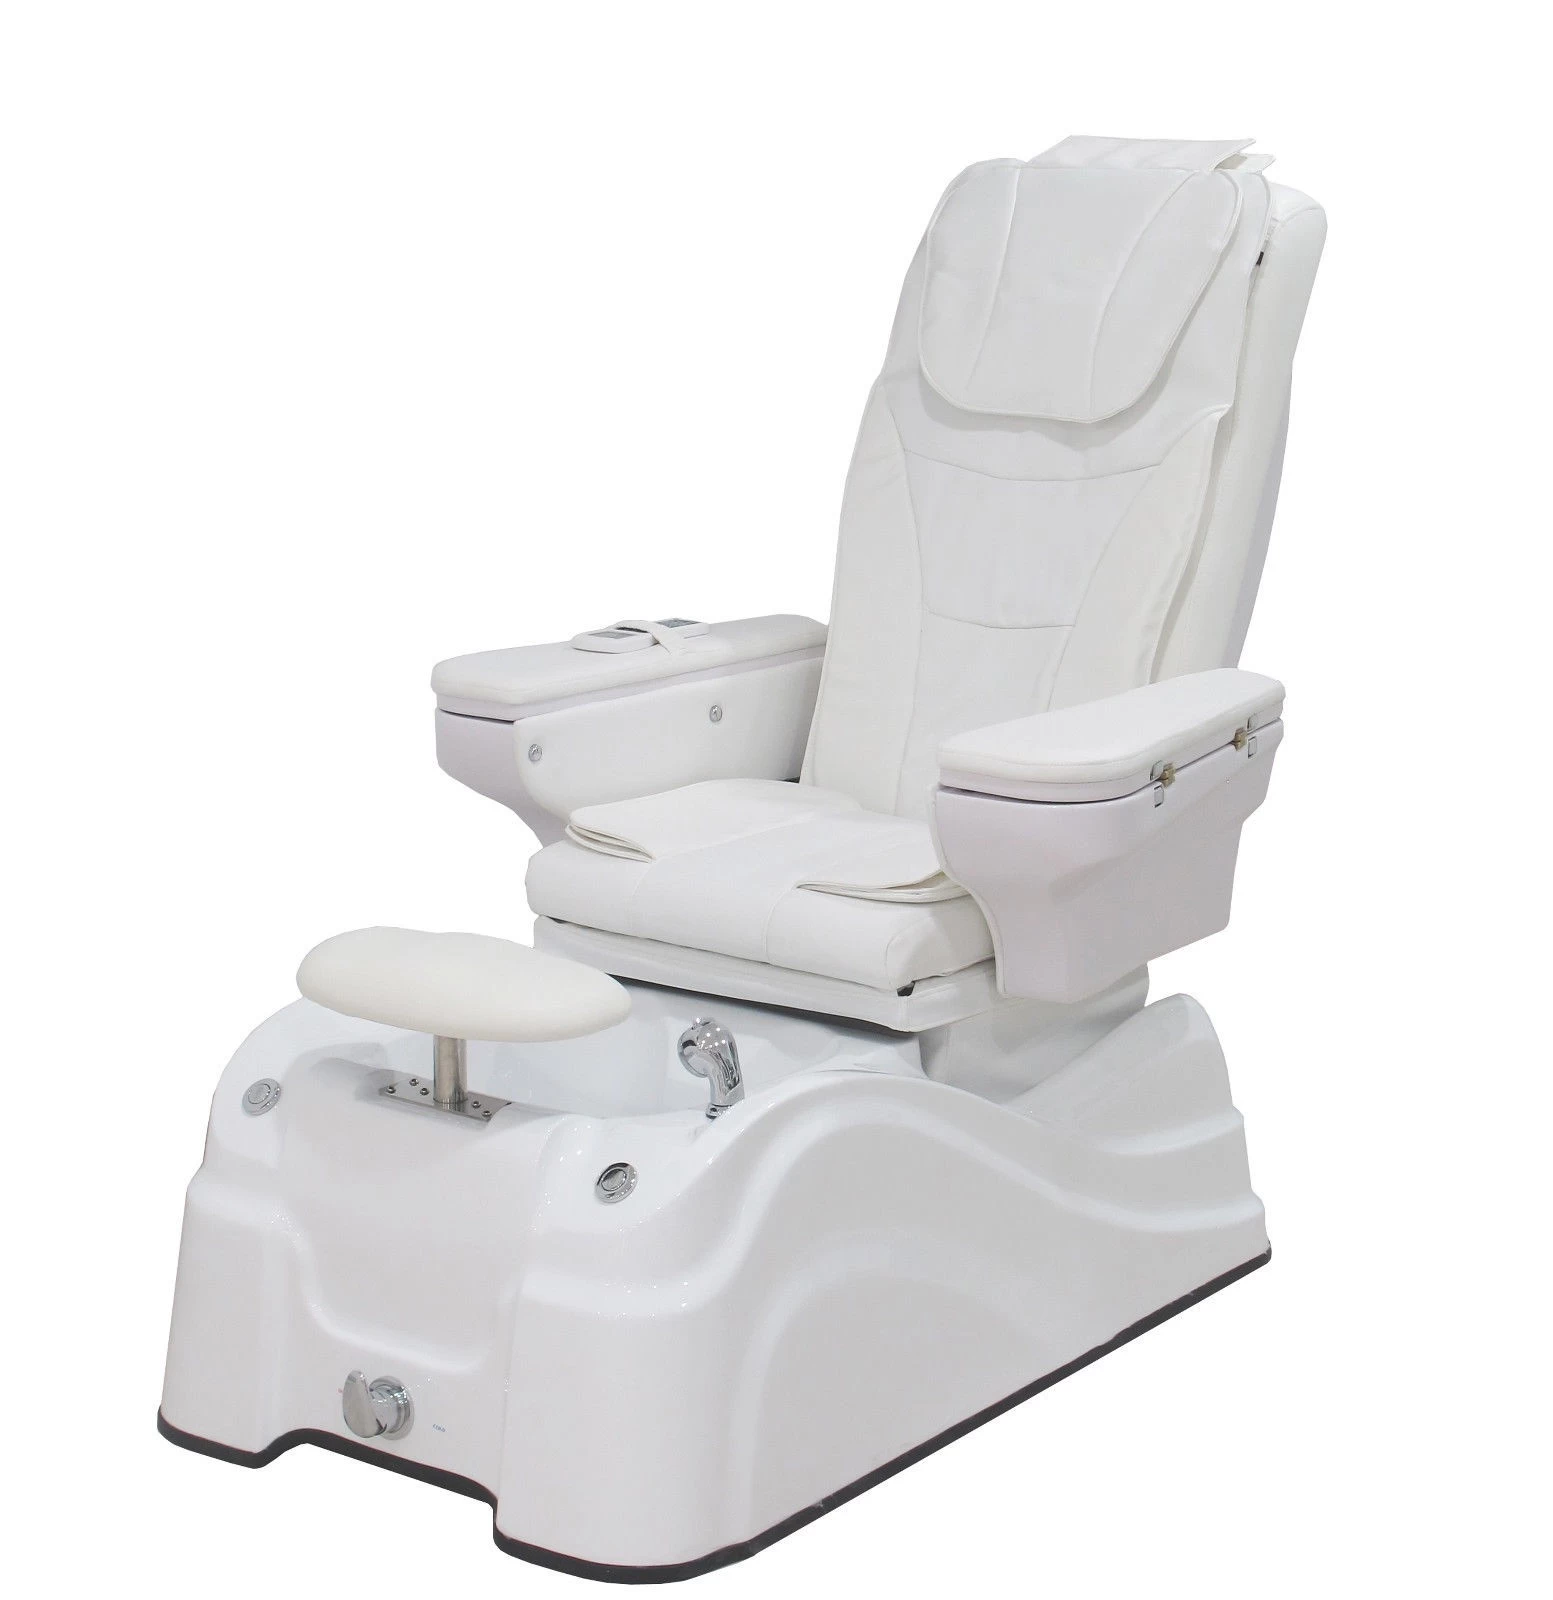 SPA Pedicure armchair with high quality PU upholstery of massage foot spa chair